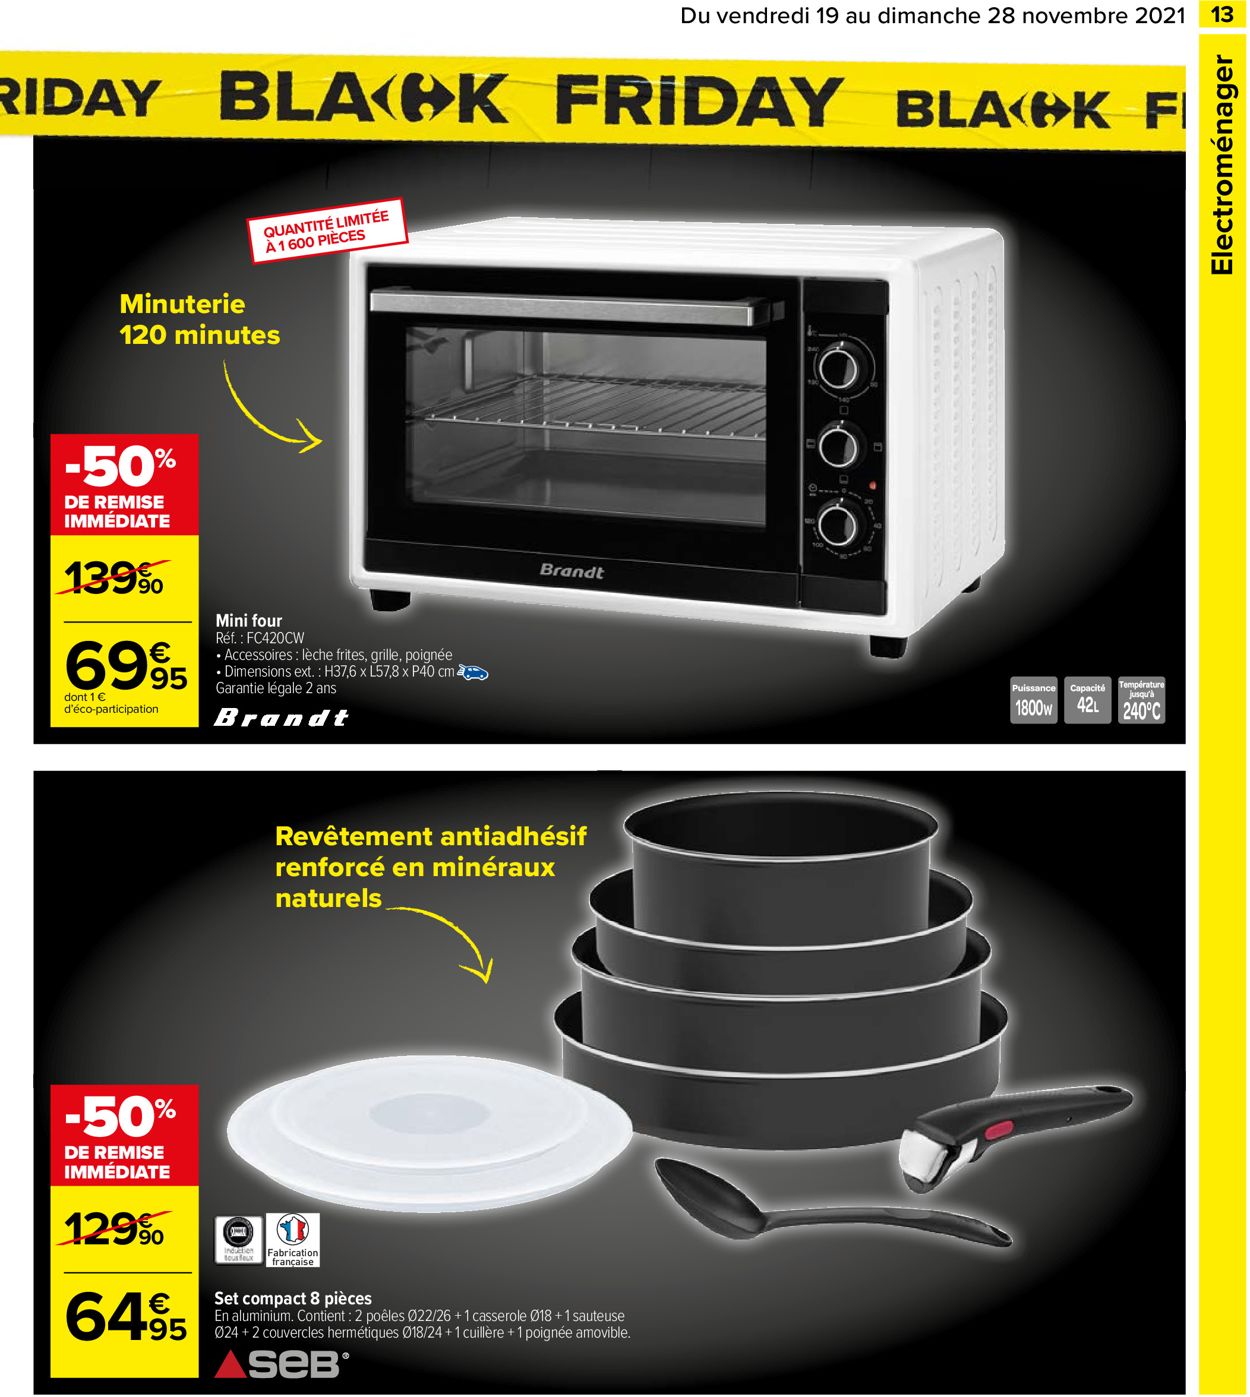 Carrefour BLACK WEEK 2021 Catalogue - 19.11-28.11.2021 (Page 13)